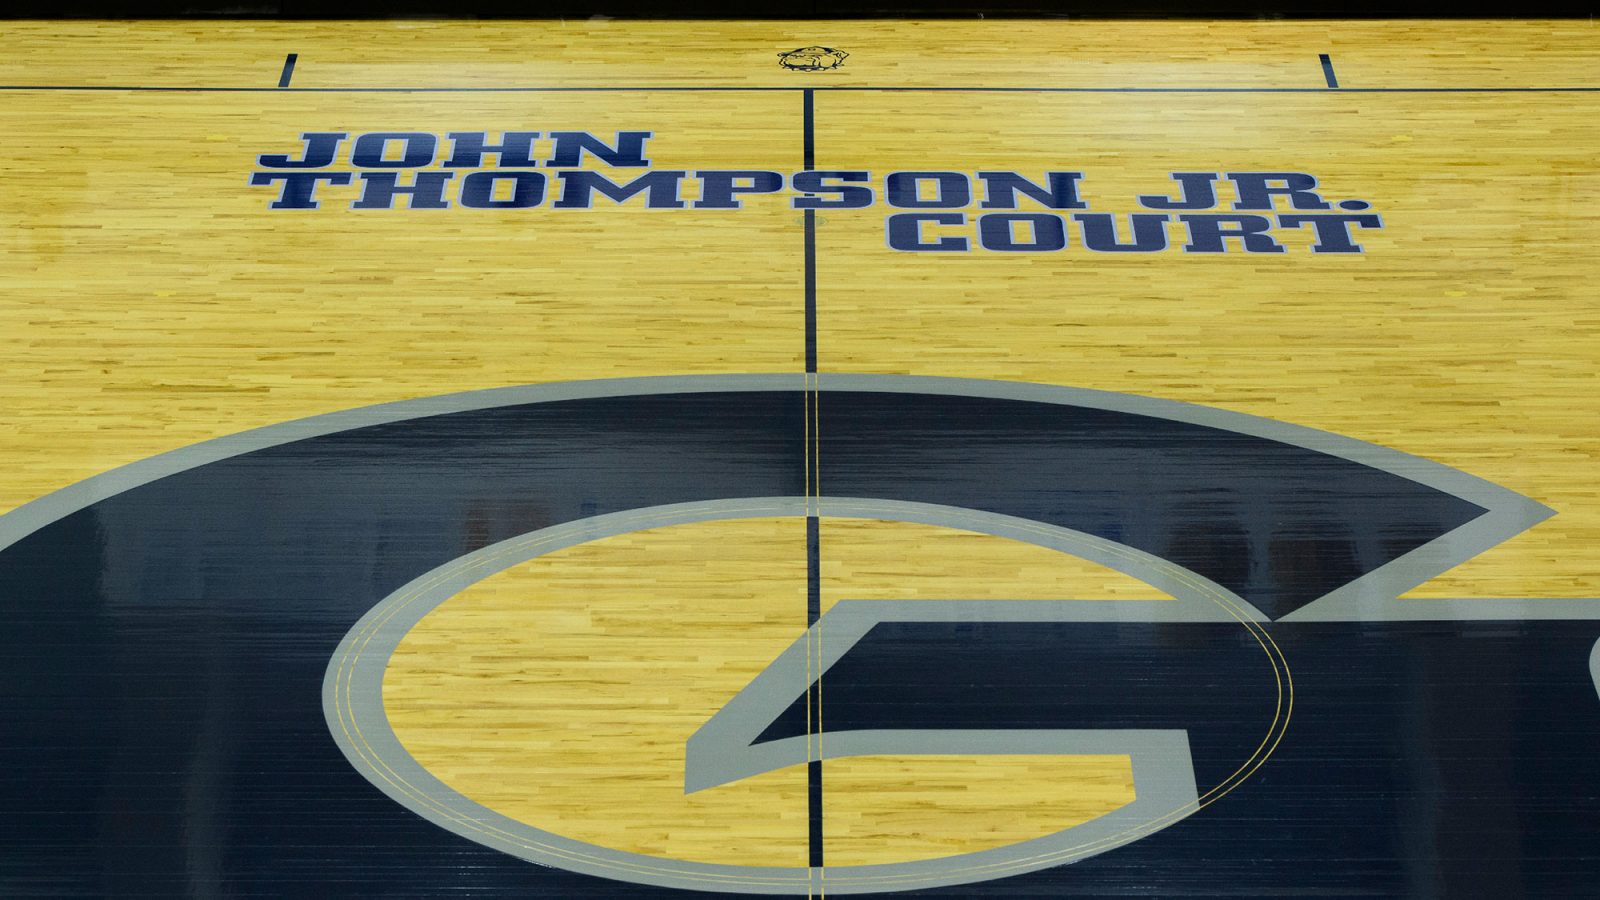 A basketball court with the Geogetown logo and John Thompson Jr. name on the court.